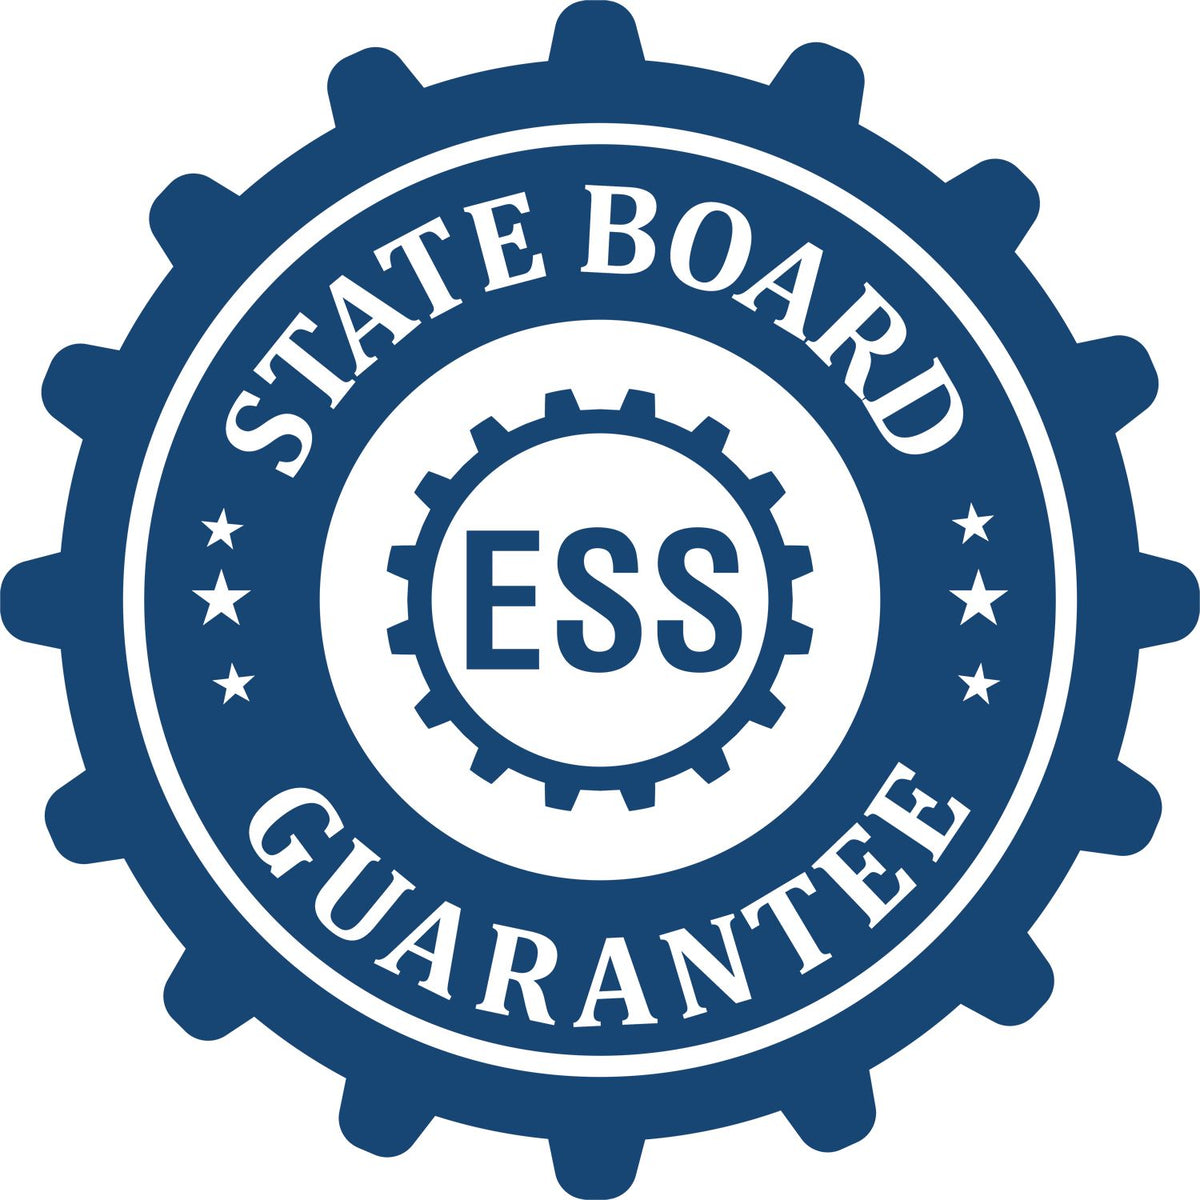 An emblem in a gear shape illustrating a state board guarantee for the Digital Wisconsin Landscape Architect Stamp product.